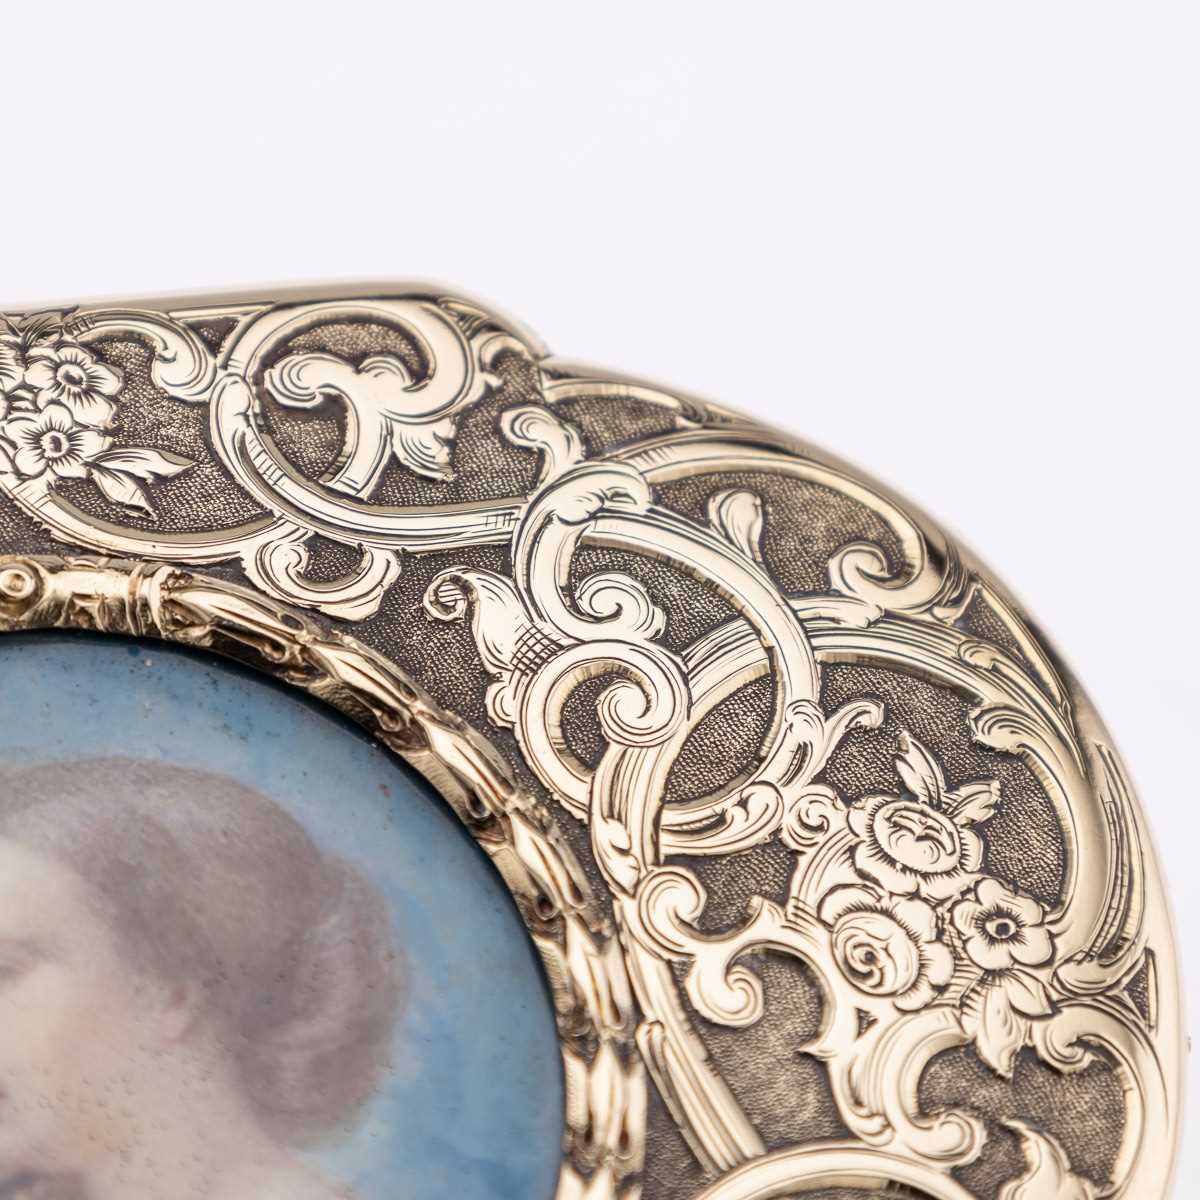 A FINE 19TH CENTURY 18CT GOLD ROYAL PRESENTATION SNUFF BOX WITH PORTRAIT OF NAPOELON III - Image 3 of 18